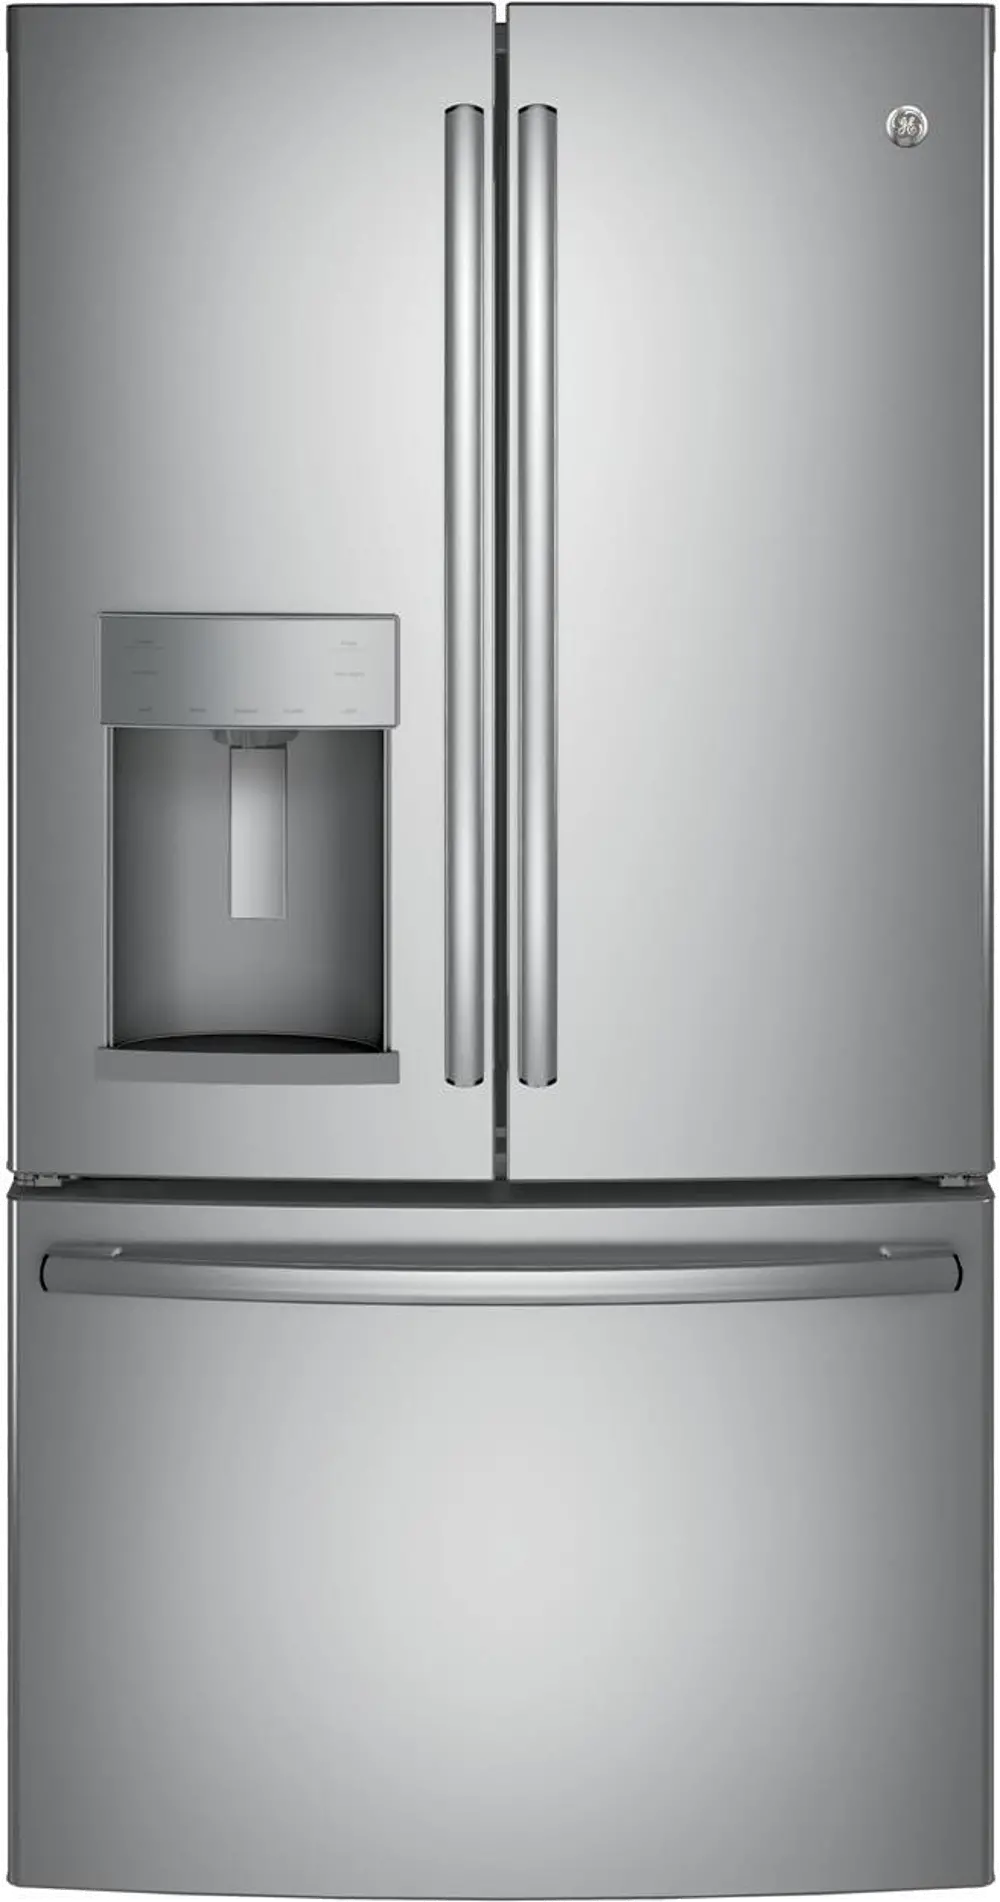 GYS22GSNSS GE Counter Depth French Door Refrigerator - 22.2 cu. ft., 36 Inch Stainless Steel-1